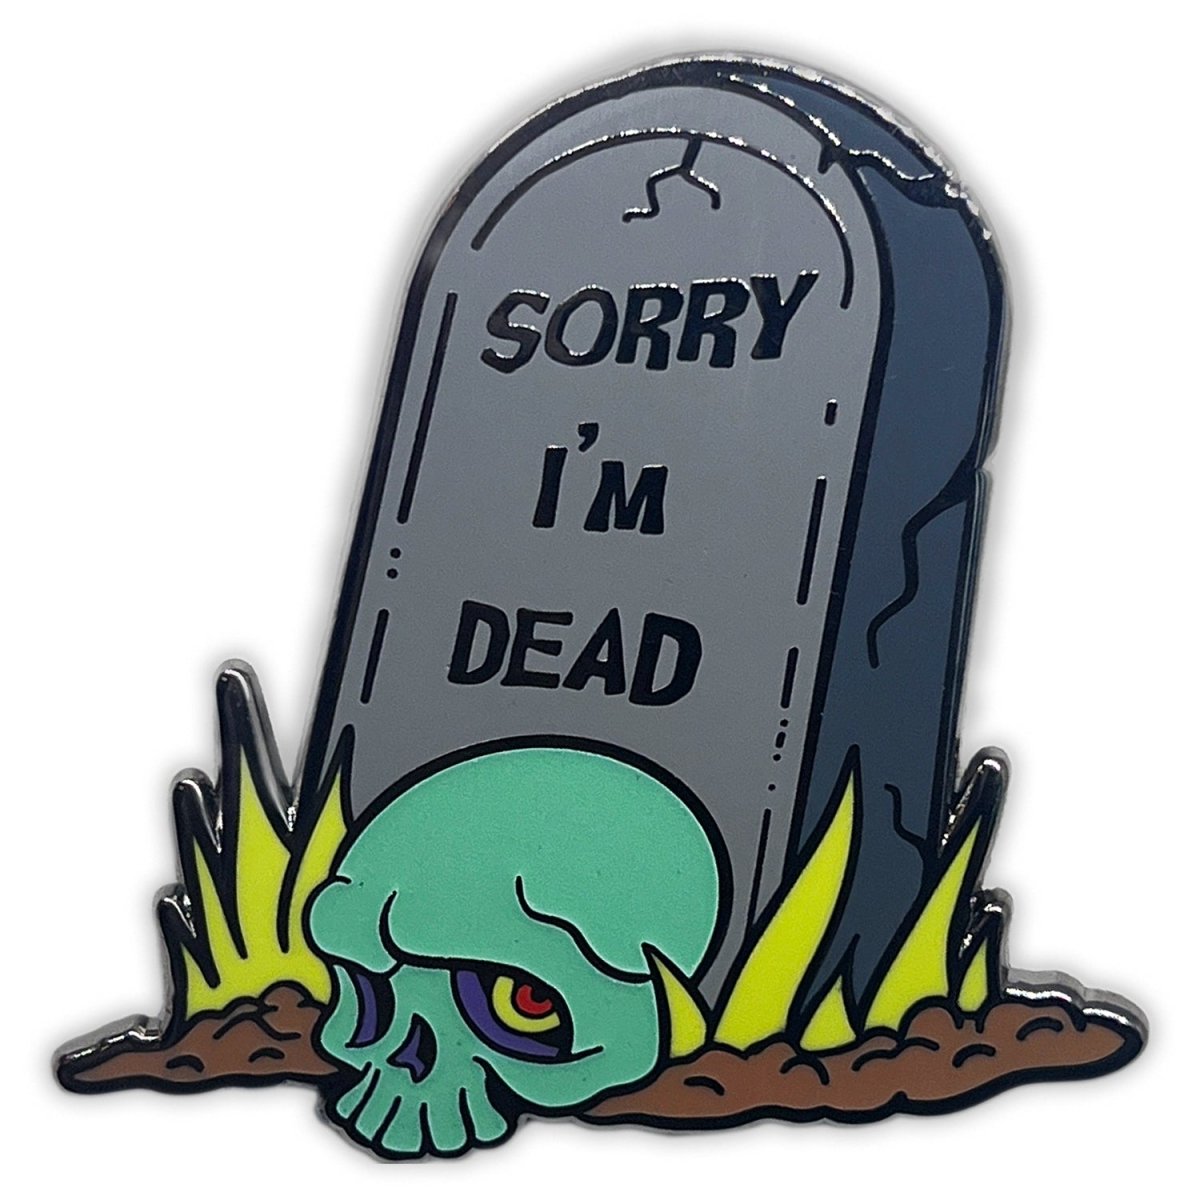 Too Fast | Slink Skull | Sorry I'm Dead Tombstone Glowing Pin